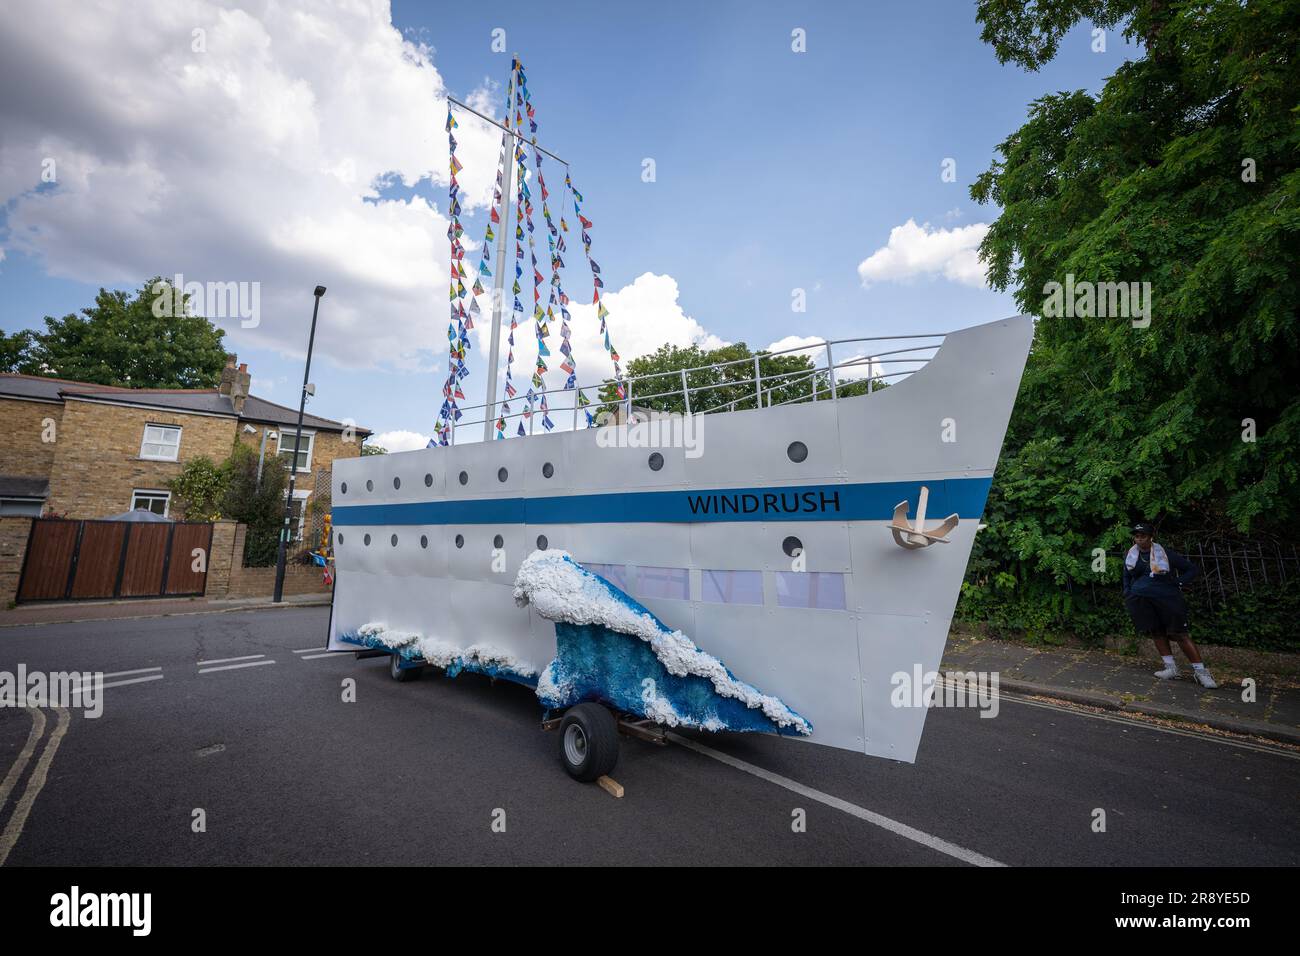 London, UK. 22nd June 2023. Windrush 75: Procession. A replica of HMT Windrush Empire ship leaves Herne Place as part of procession celebrations towards Brixton's Windrush Square. The procession is part of the celebrations of the Windrush migrant generation who would go on to shape modern Britain. Credit: Guy Corbishley/Alamy Live News Stock Photo